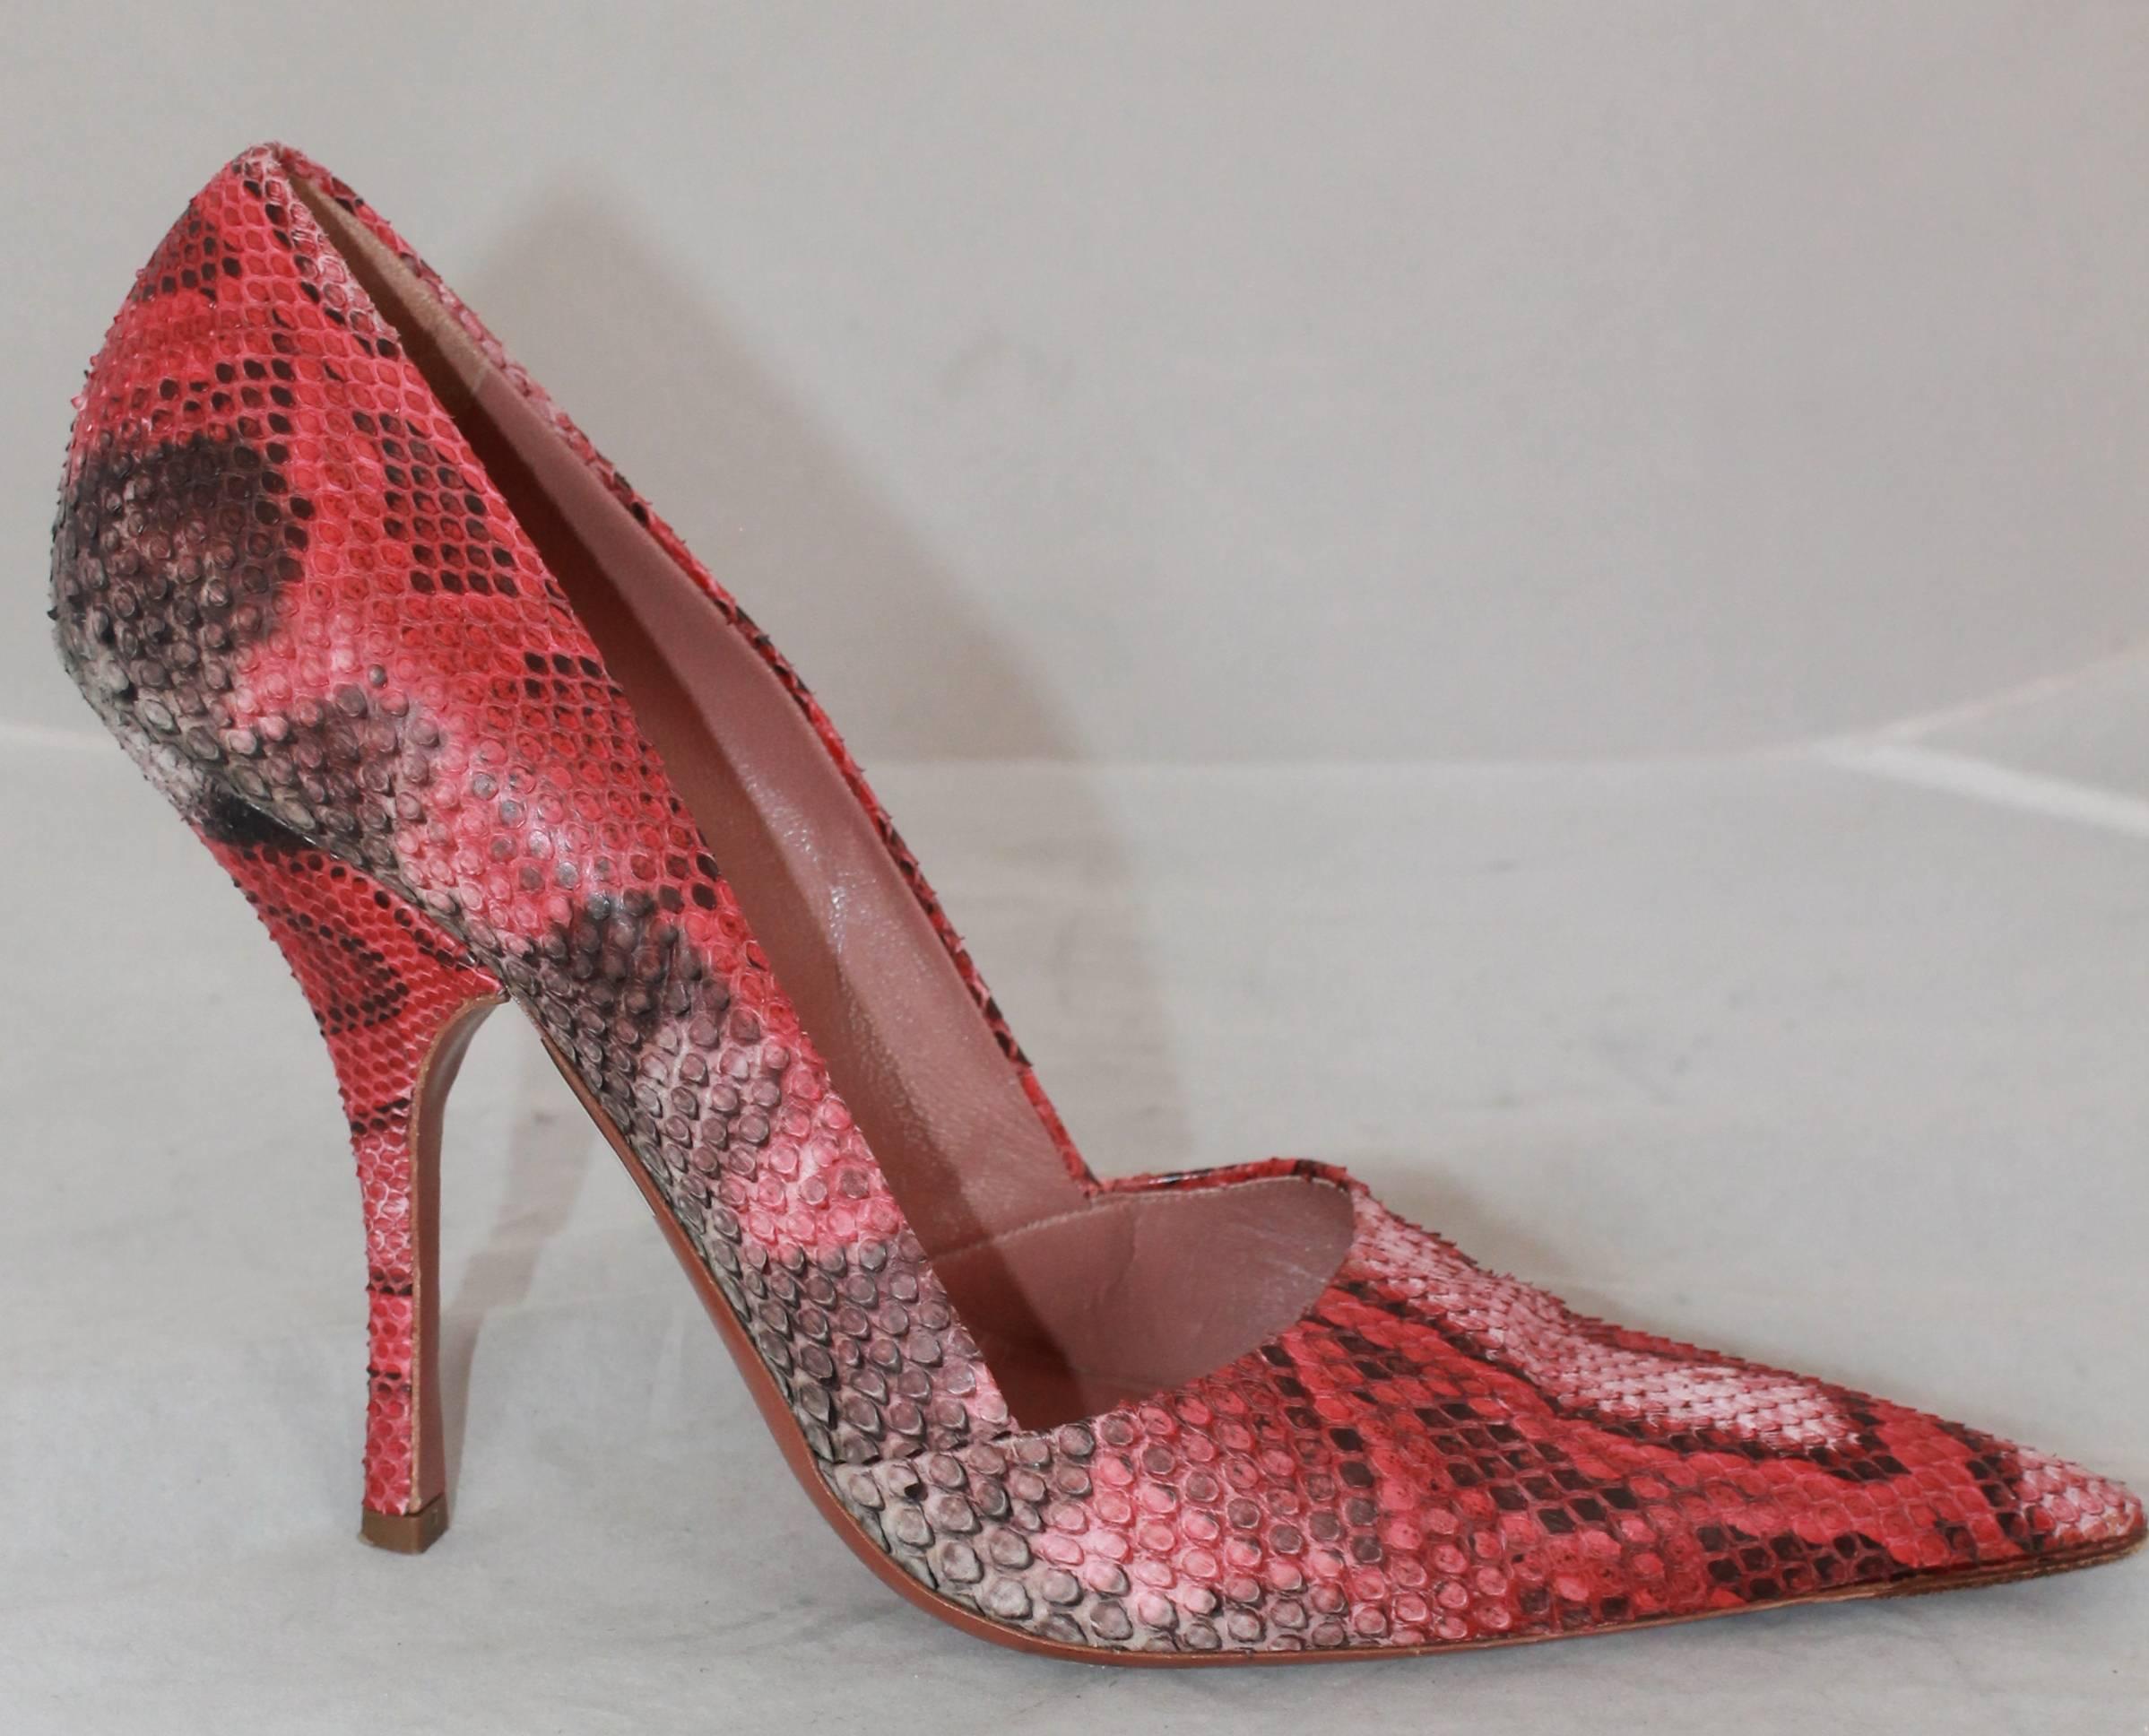 Alaia Red & Black Snake Skin Pointed Toe Pumps - 41.  These uniquely beautiful pumps are in good condition with some noticeable wear on the heel and soles.  These pumps features an ombre effect with some areas being lighter or darker than